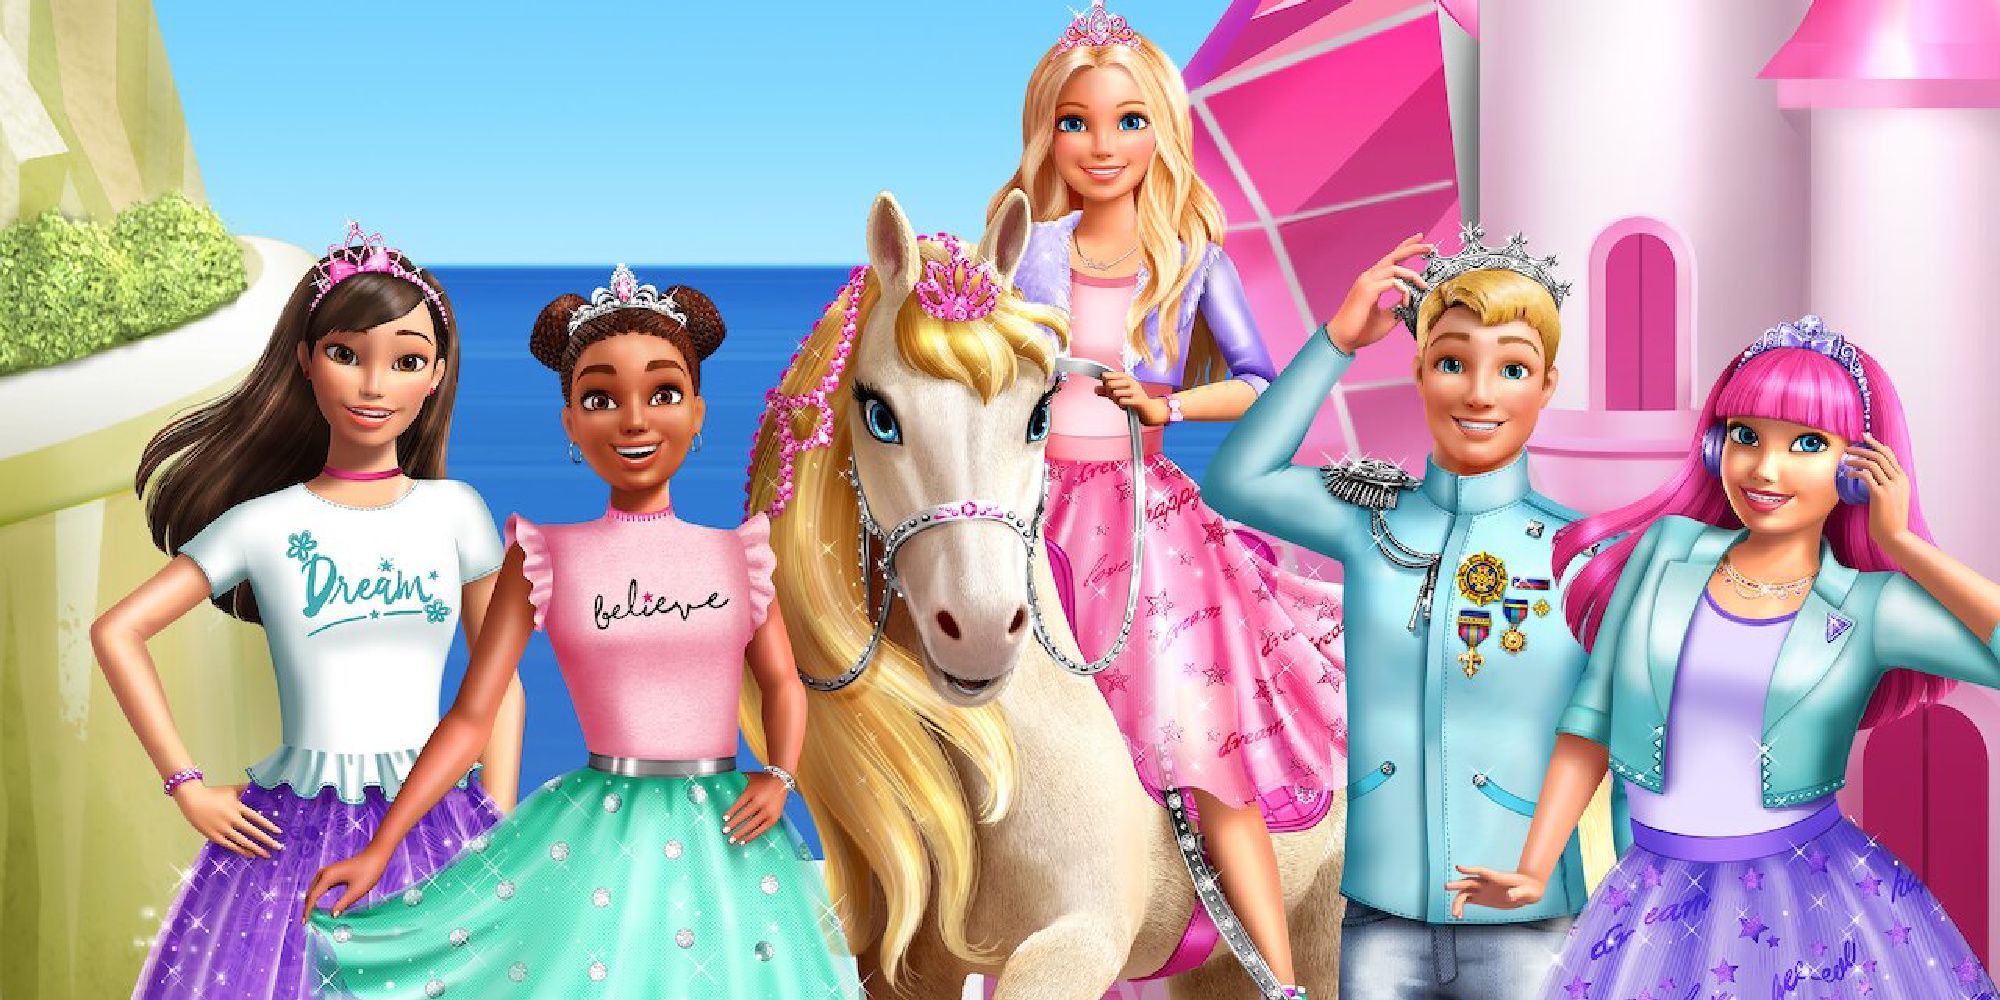 Barbie and the young princesses in Princess Adventure